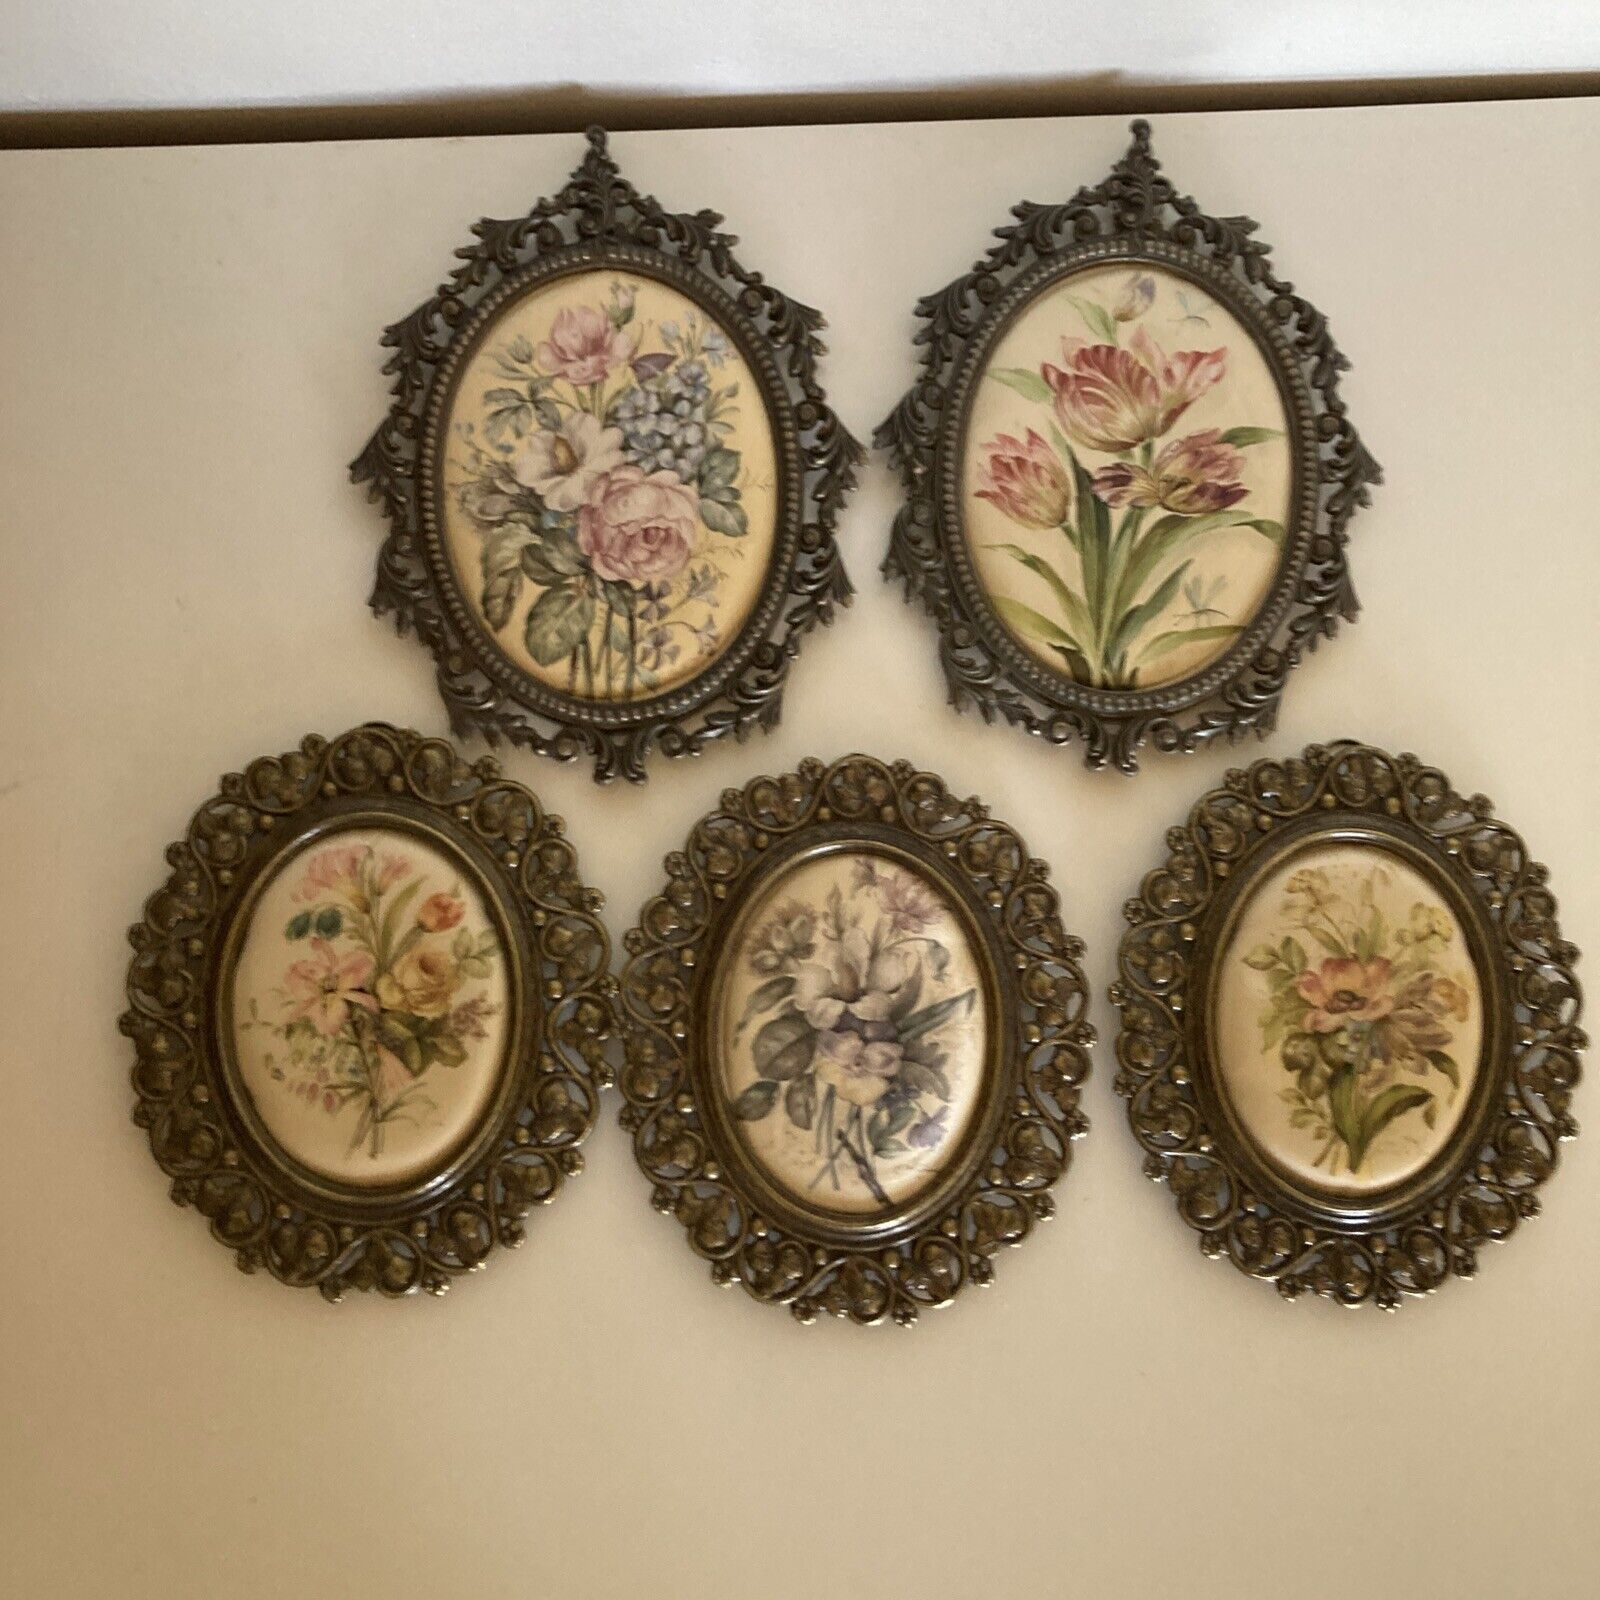 Vintage Floral Frame Made in Italy Lot of 5. 2 Large 3 Small. Metal.Silky Cloth